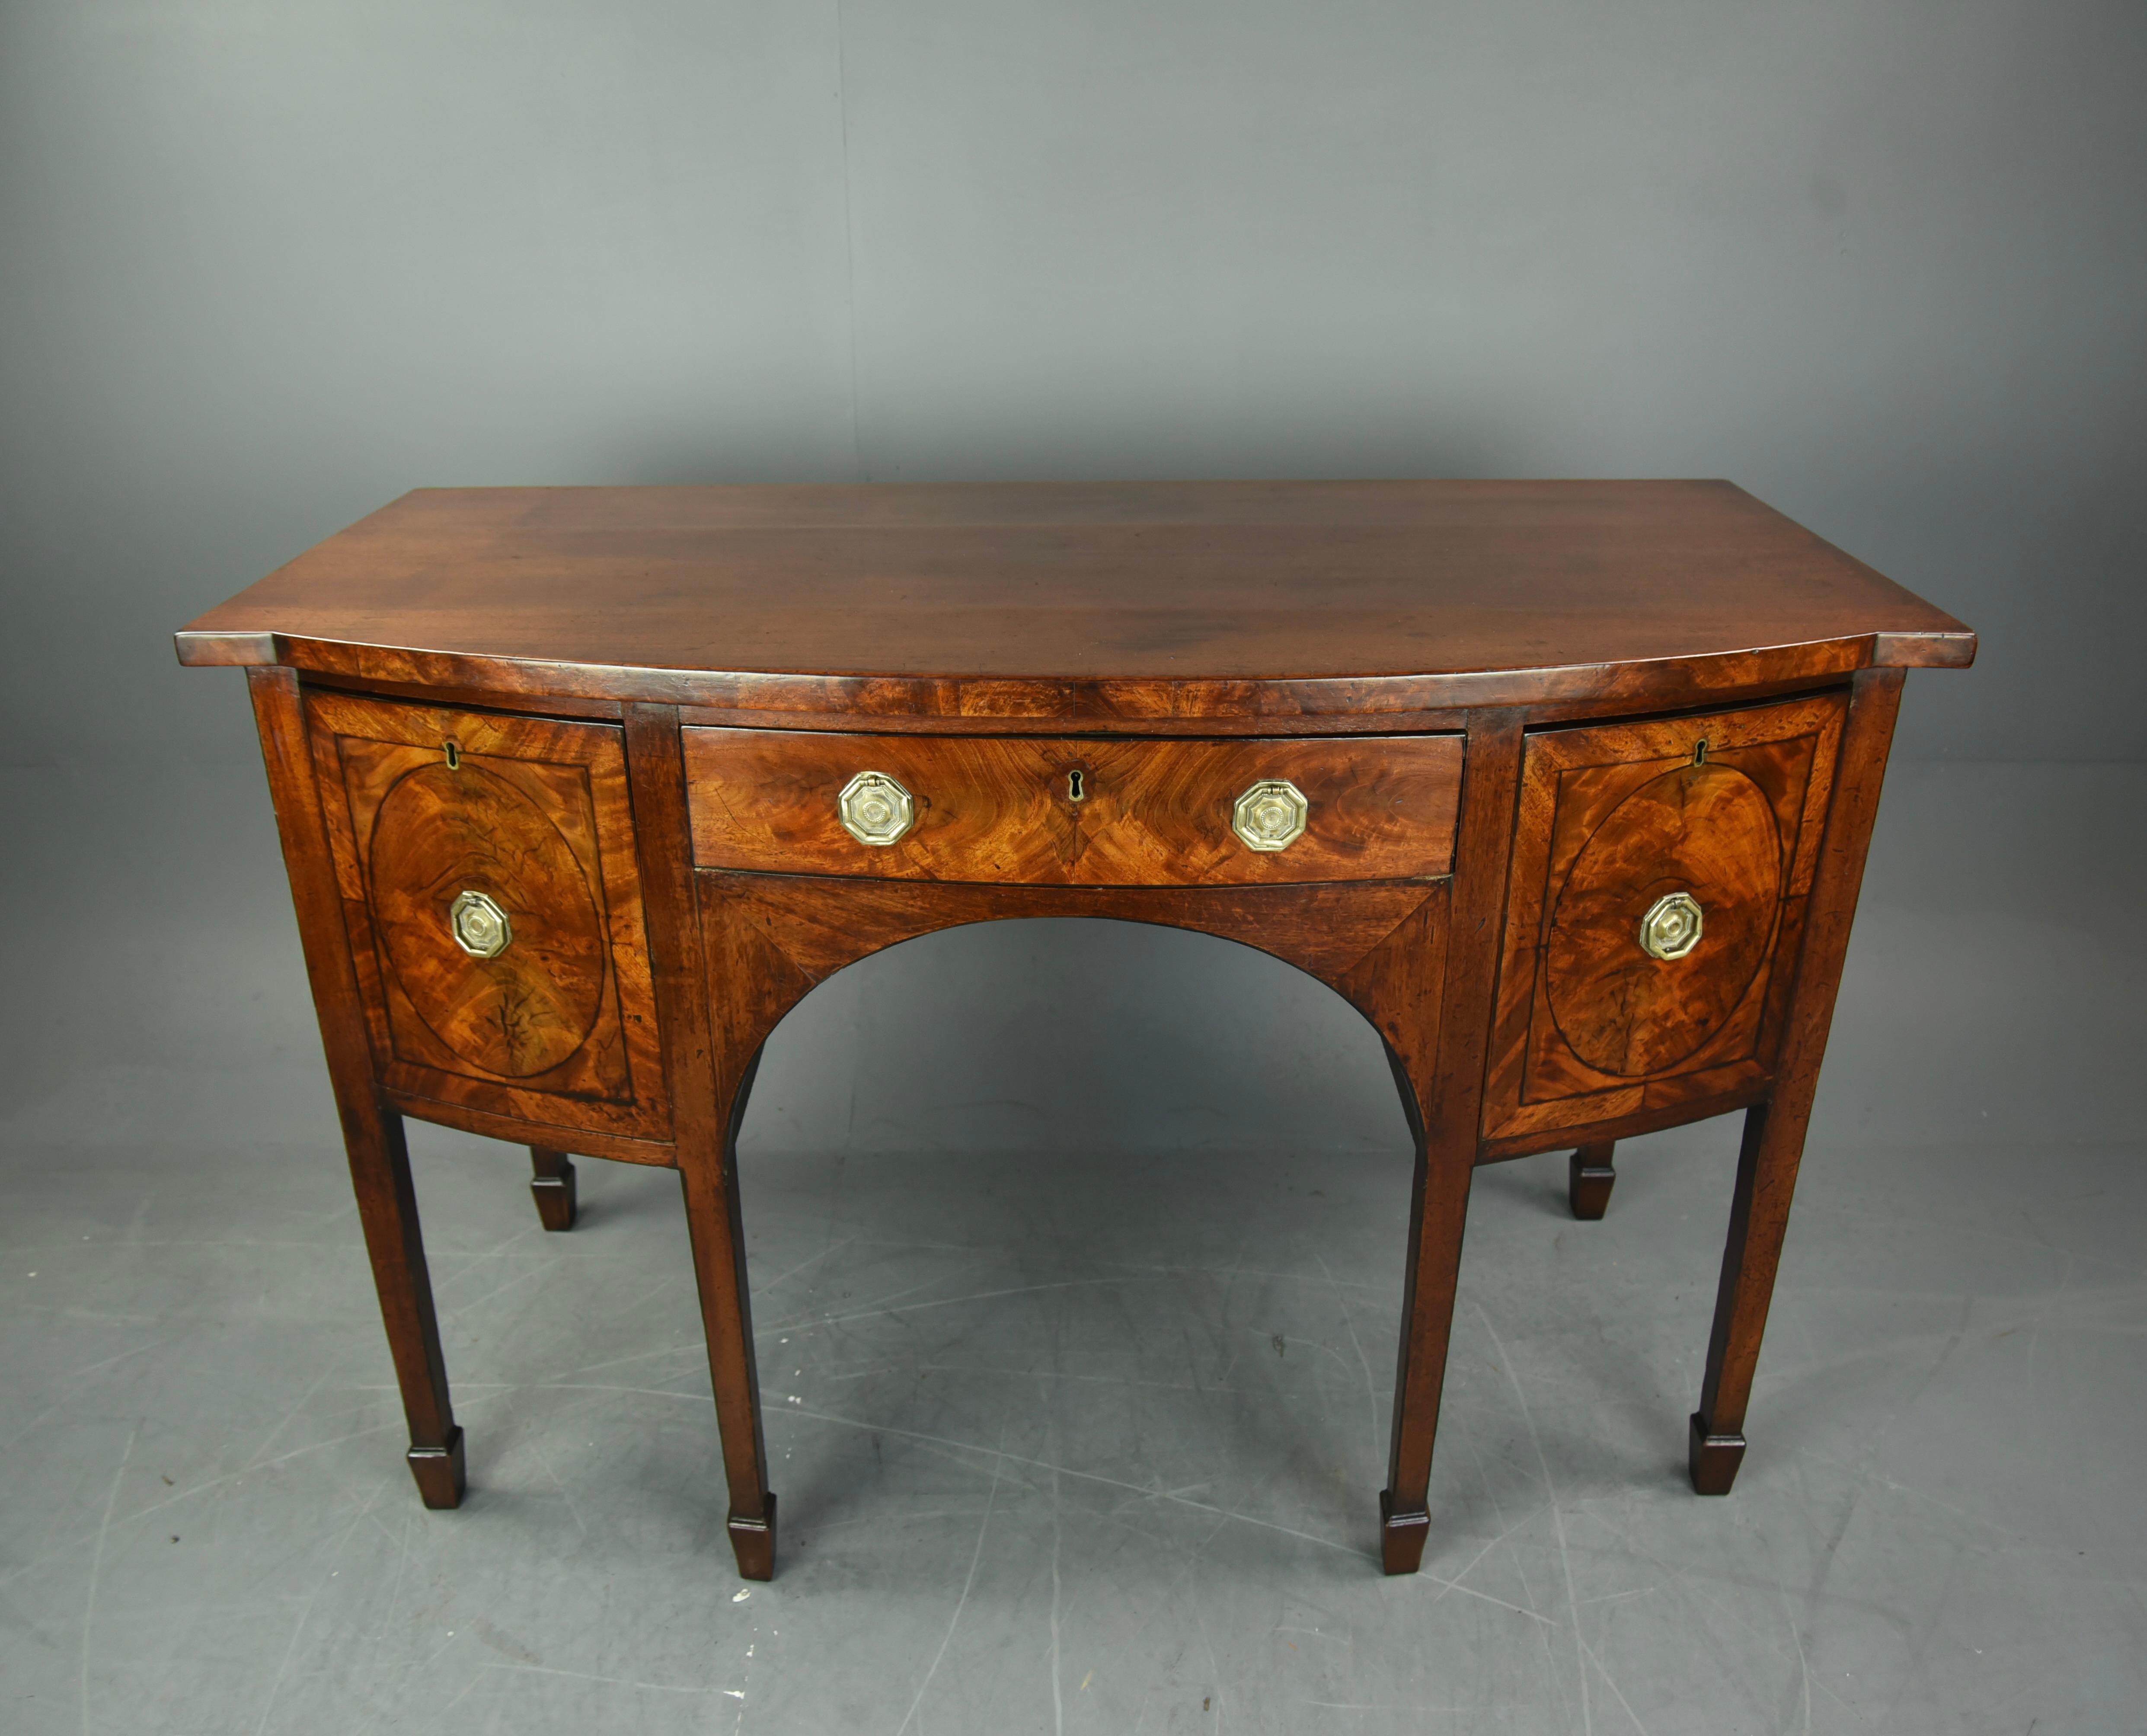 Georgian mahogany sideboard circa 1800.
The sideboard has a wonderful colour and grain with two deep drawers and a centre drawer with a working lock and key .that are all solid and slide nice and smooth as they should.
It stands on six square